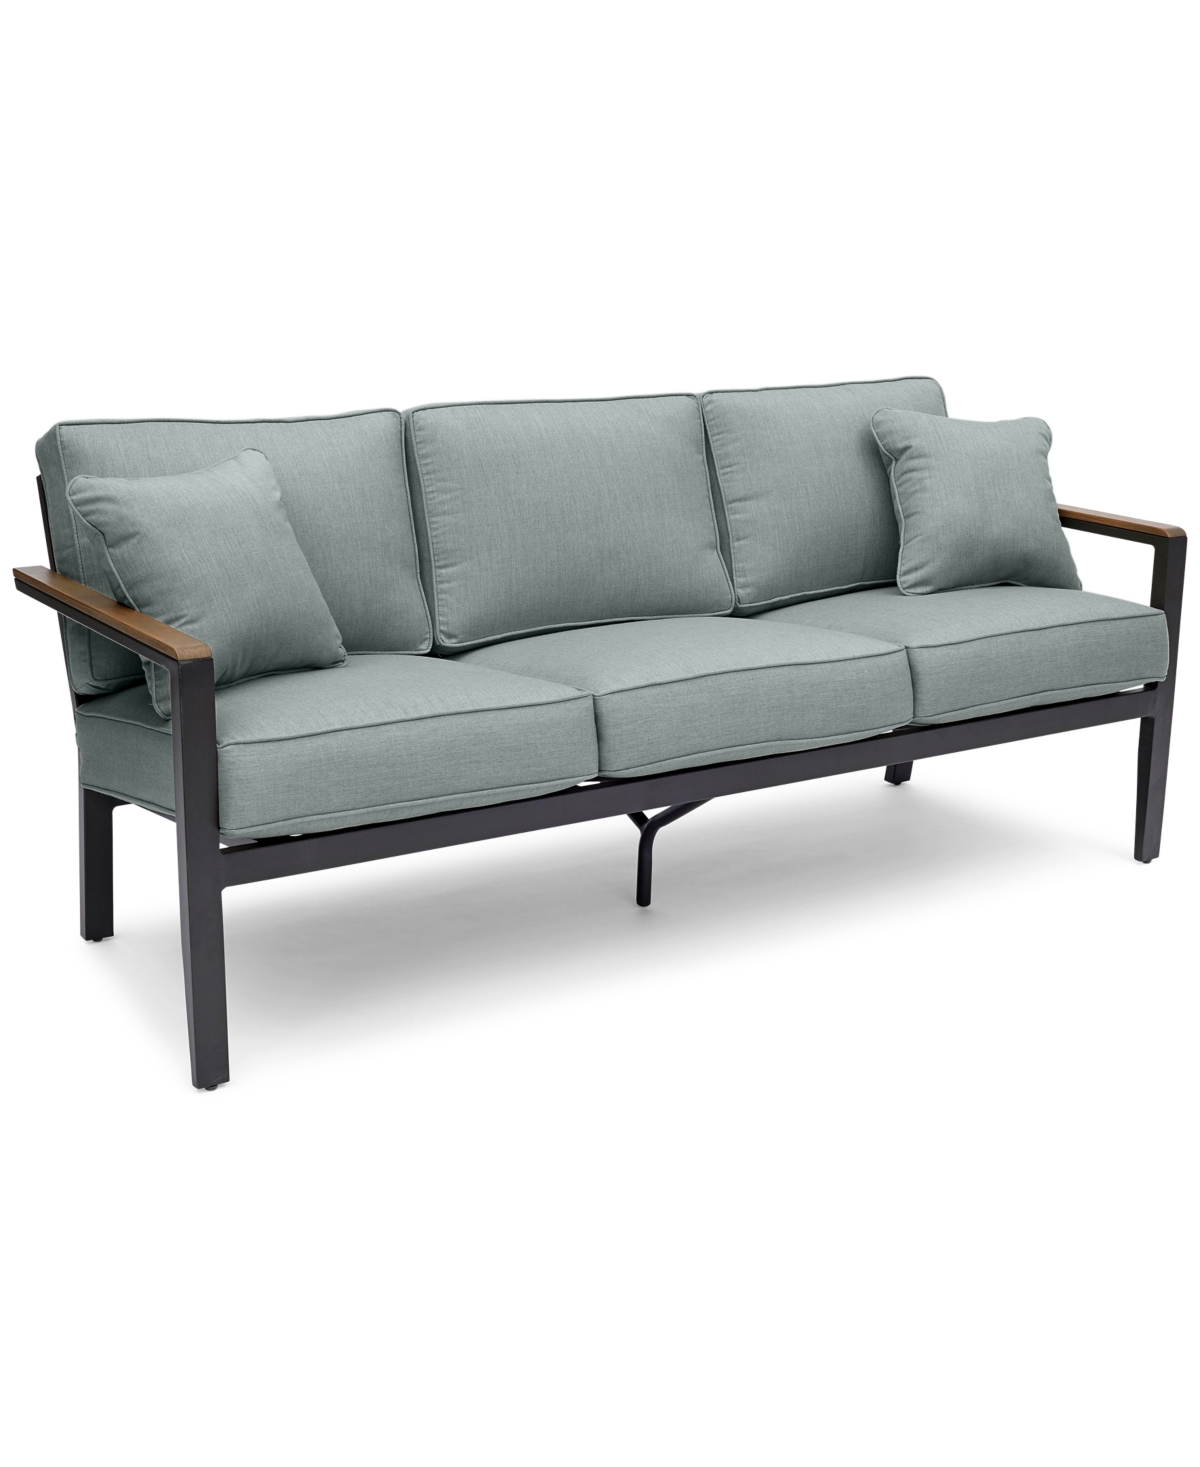 Stockholm Outdoor Sofa with Outdura Cushions, Created for Macys